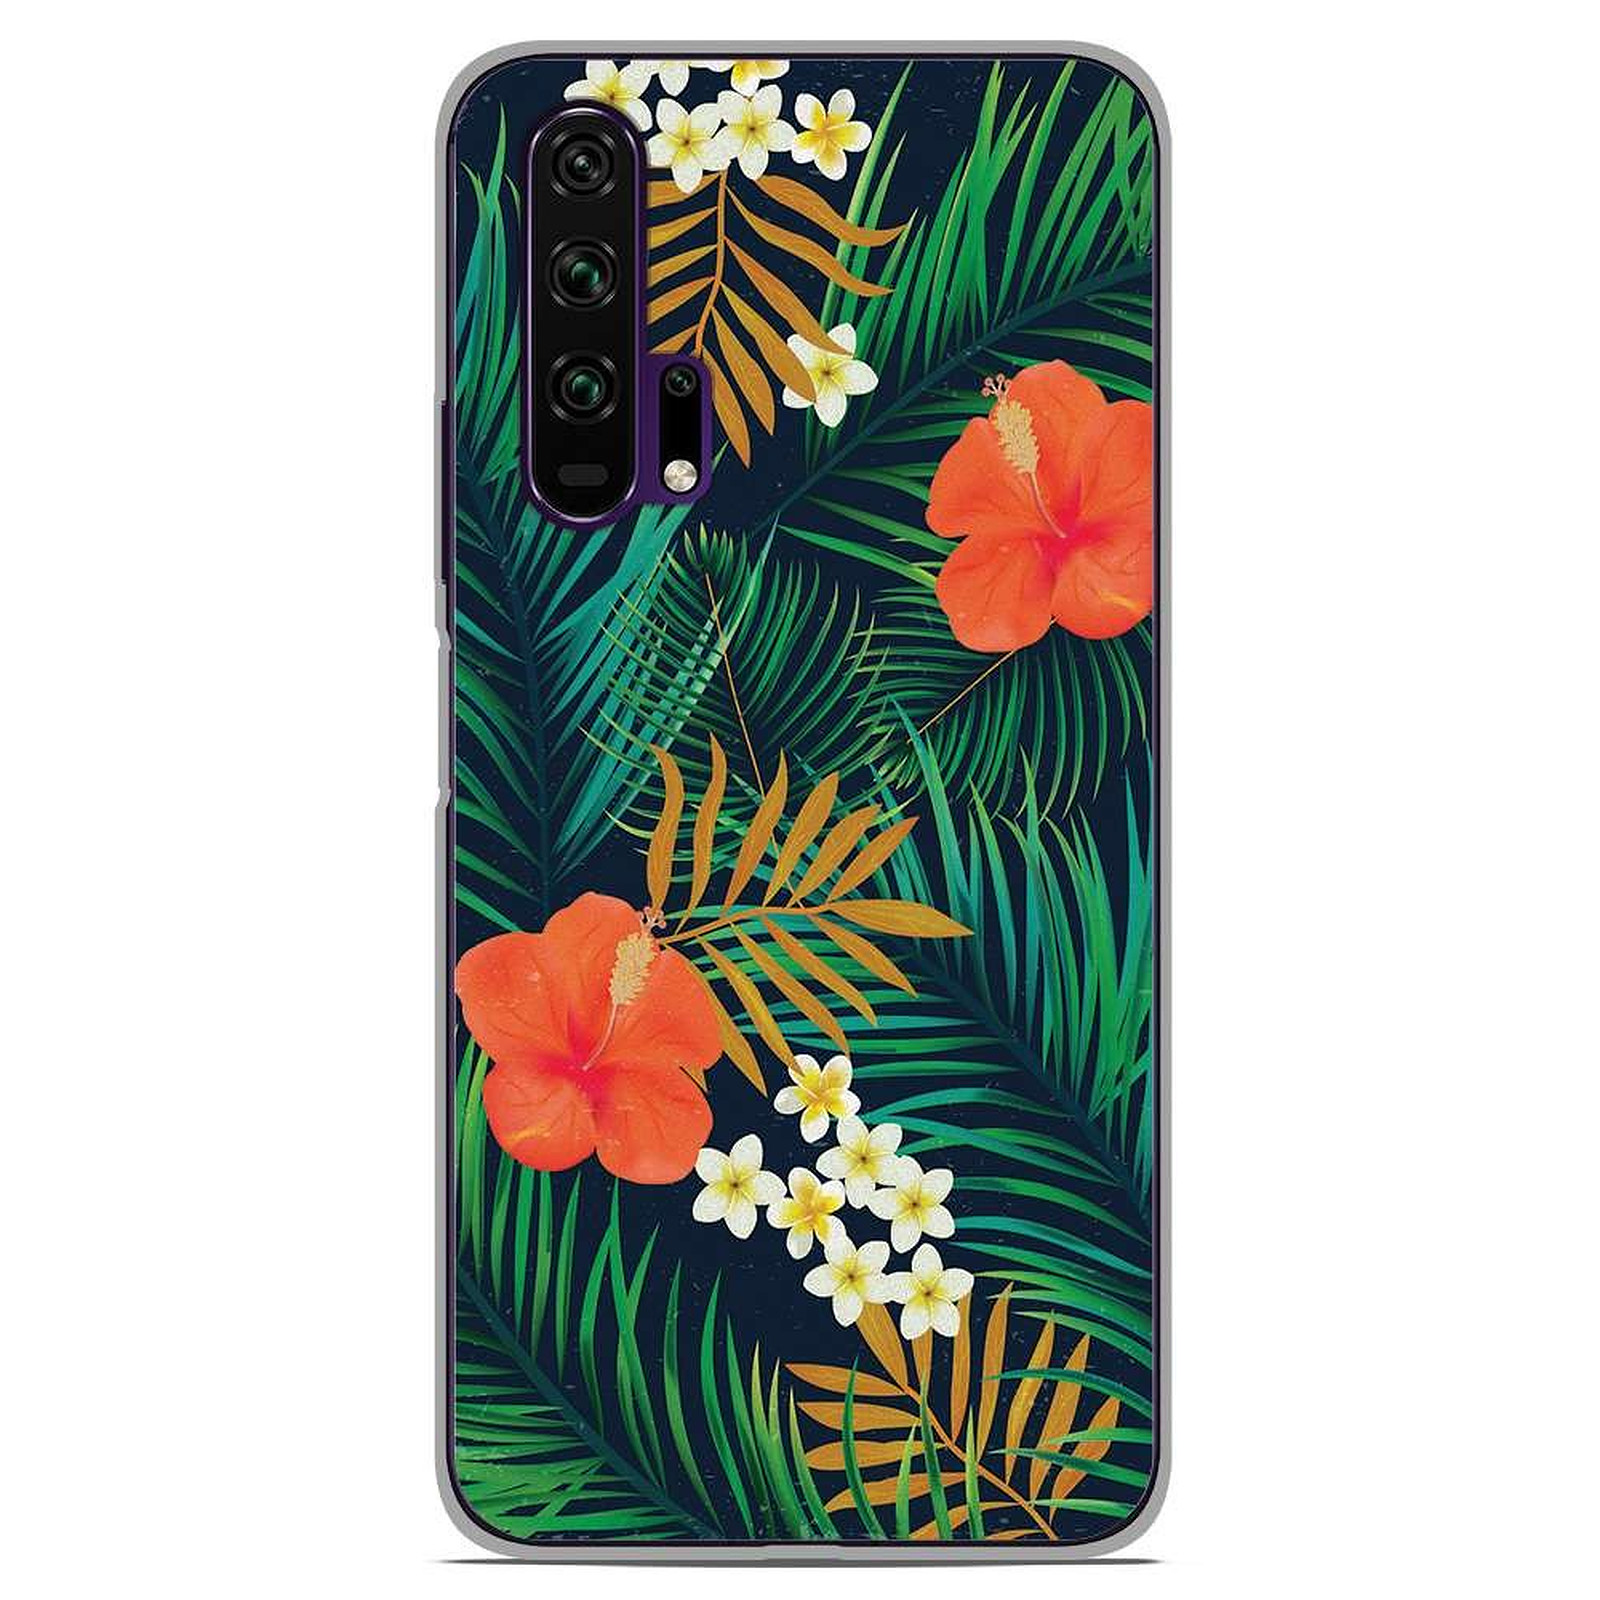 1001 Coques Coque silicone gel Huawei Honor 20 Pro motif Tropical - Coque telephone 1001Coques